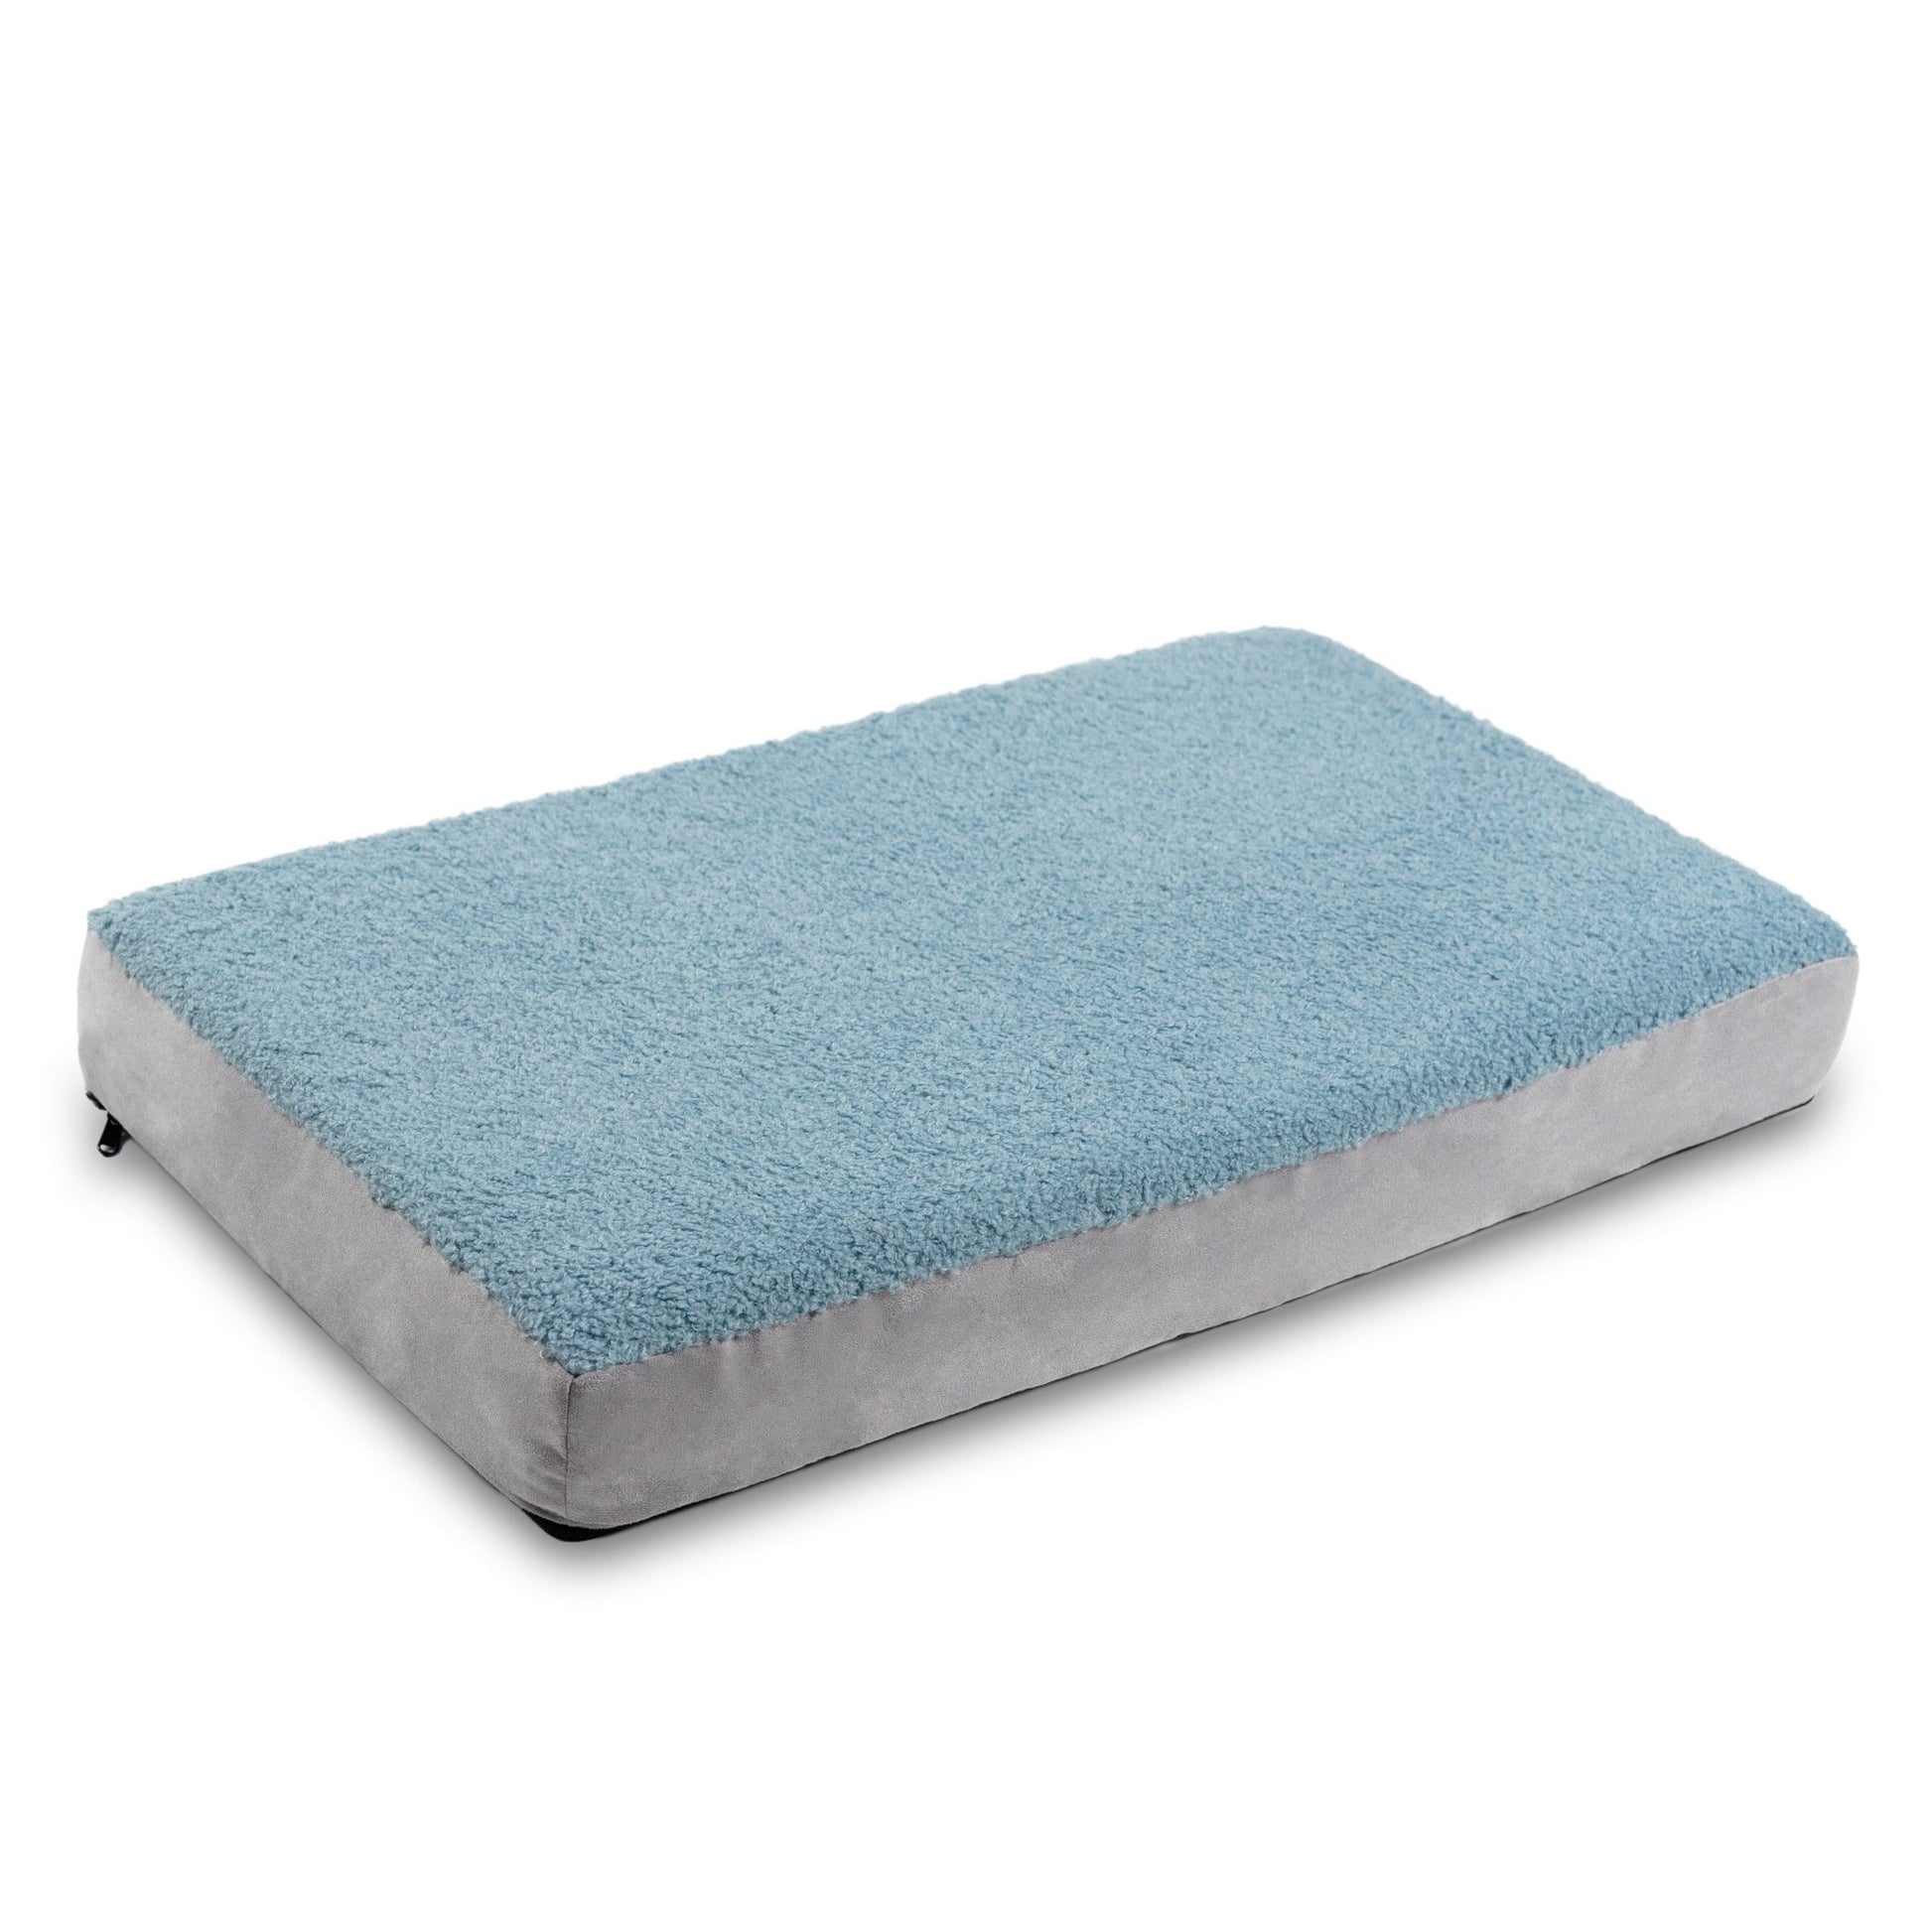 Jaxx Cubbi Dog Bed - Plush Boucle Sherpa Top for Cozy Comfort, Supportive Memory Foam for Joint Pain Relief, No - Slip Base for Stability, Machine Washable Cover and Waterproof Liner, Small (19750) - SchoolOutlet